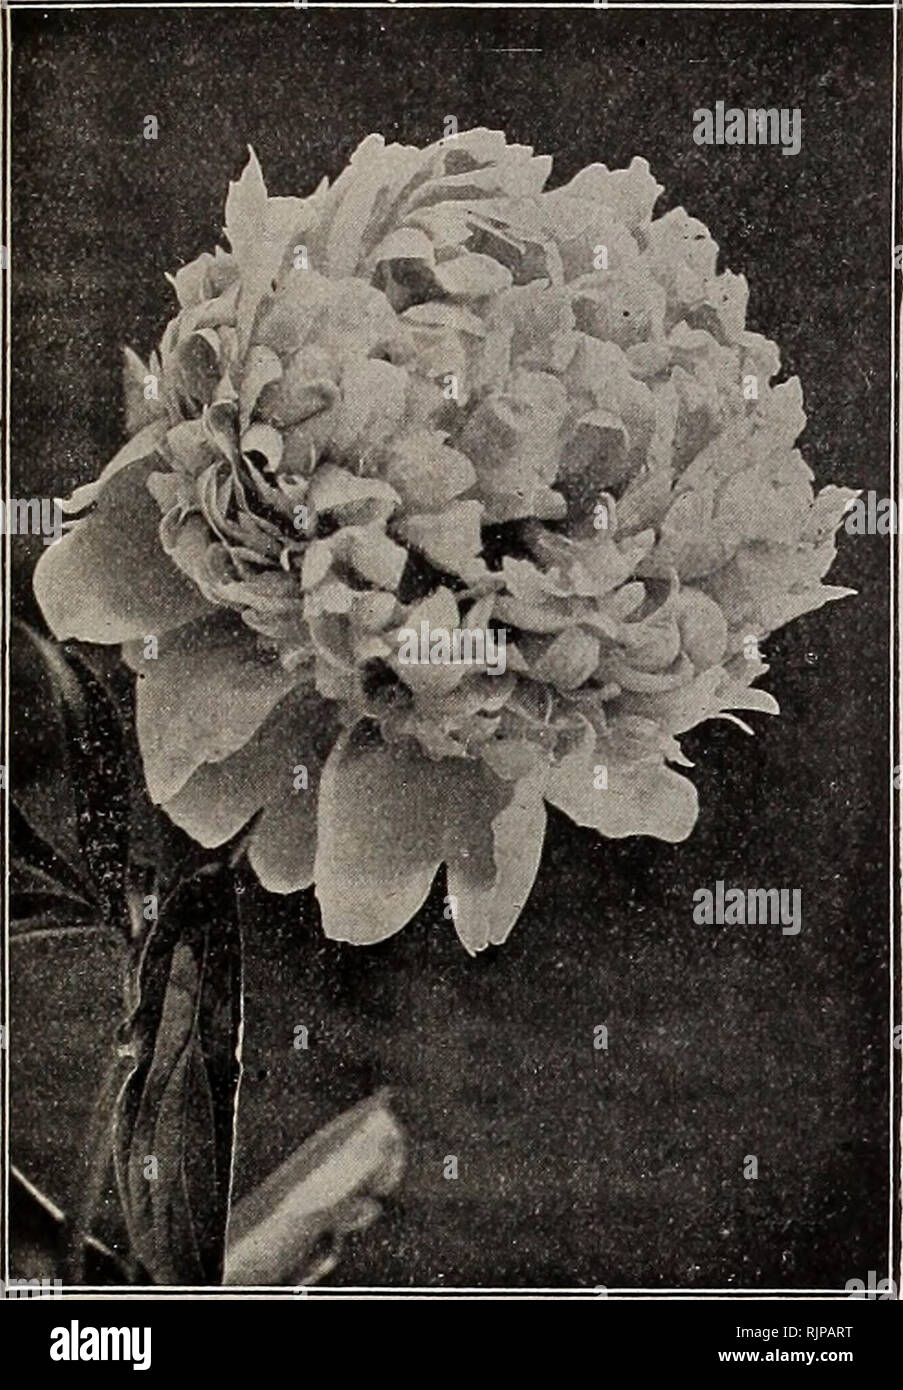 . Autumn catalogue. Seeds Catalogs; Seed industry and trade Ohio Columbus Catalogs; Vegetables Ohio Columbus Catalogs; Flowers Ohio Columbus Catalogs; Gardening Ohio Columbus Equipment and supplies Catalogs. Bulbs, Plants and Seeds iov Autumn Planting. 2i. Livi&quot;gst0&quot;,s Hardy Peonies Everybody should Plant Plenty of Peonies. Hie Most Popular of all Hardy Plants, and Con- tinually Growing in Favor. * THE FALL IS THE TIME TO PLANT THEM. Everyone knows the old-time &quot;Piney&quot; of our grandmother's garden, and how indispensable they were. It would seem almost impossible to have impr Stock Photo